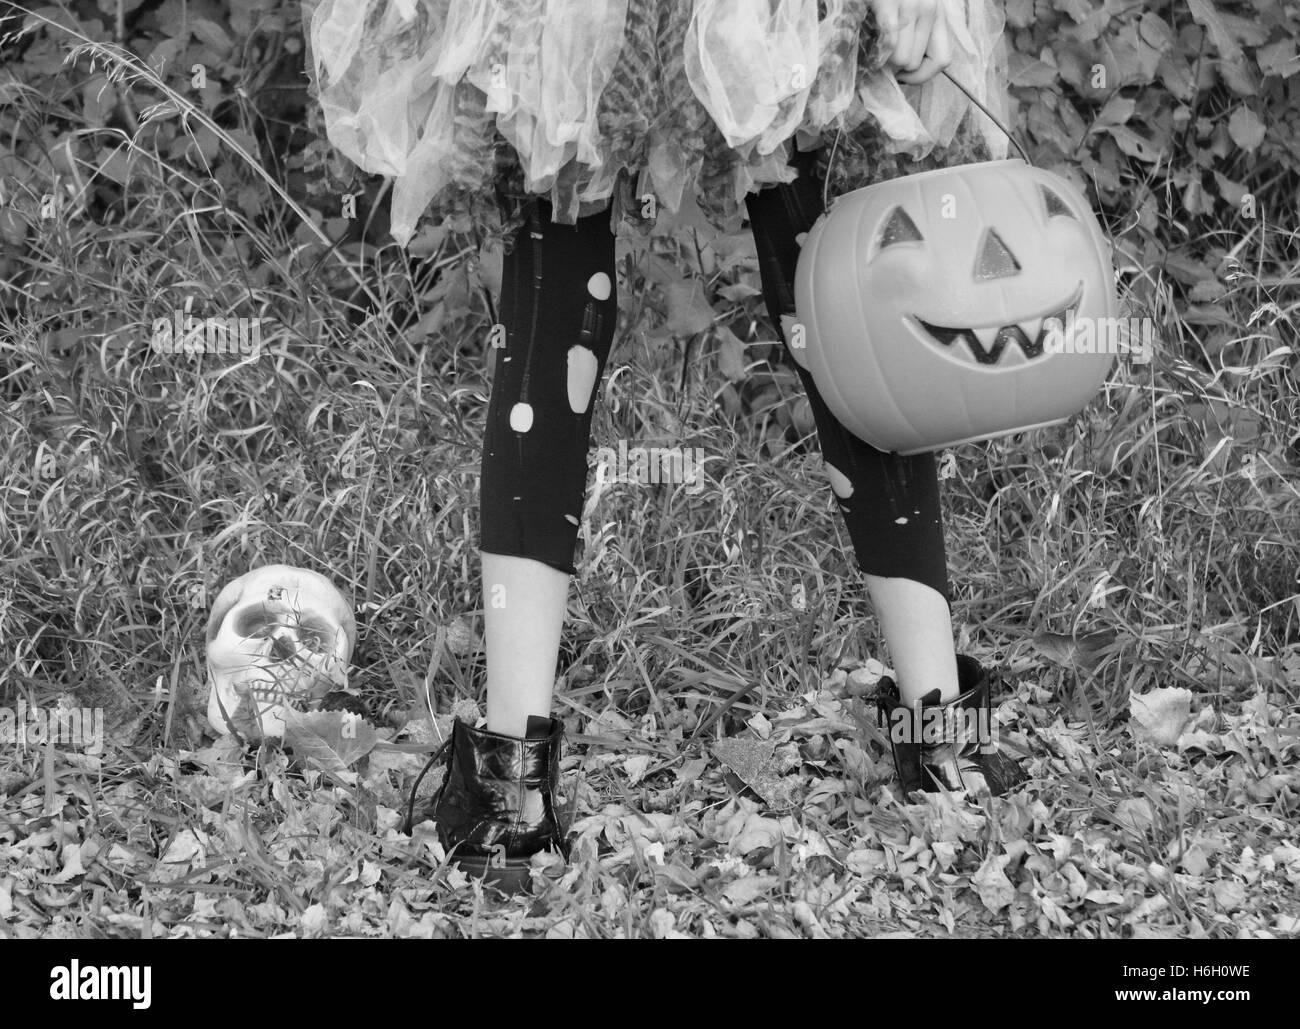 girl in tutu standing in forest with trick or treat bucket and torn clothing looking at bones or skull Stock Photo